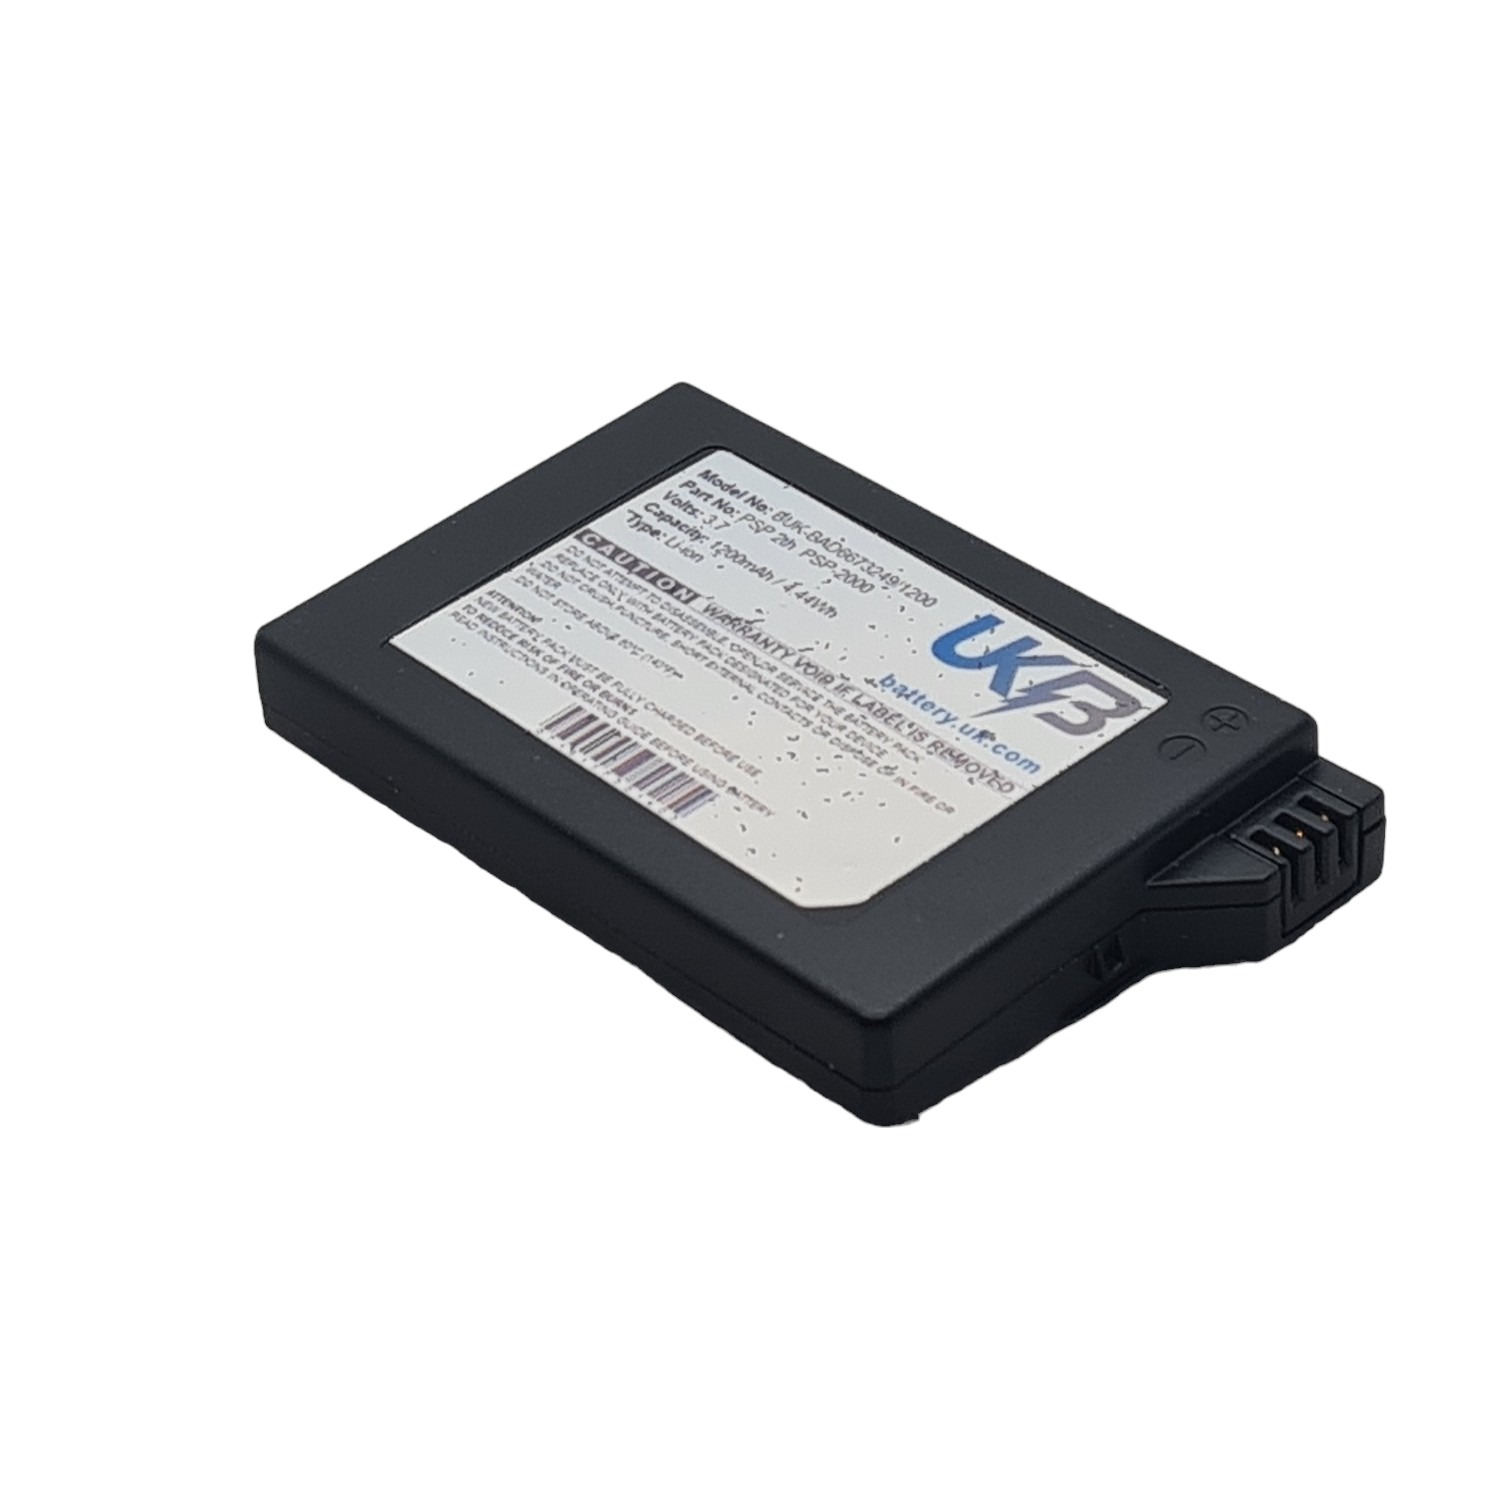 Sony PSP-S110 Lite PSP 2th PSP-2000 Compatible Replacement Battery